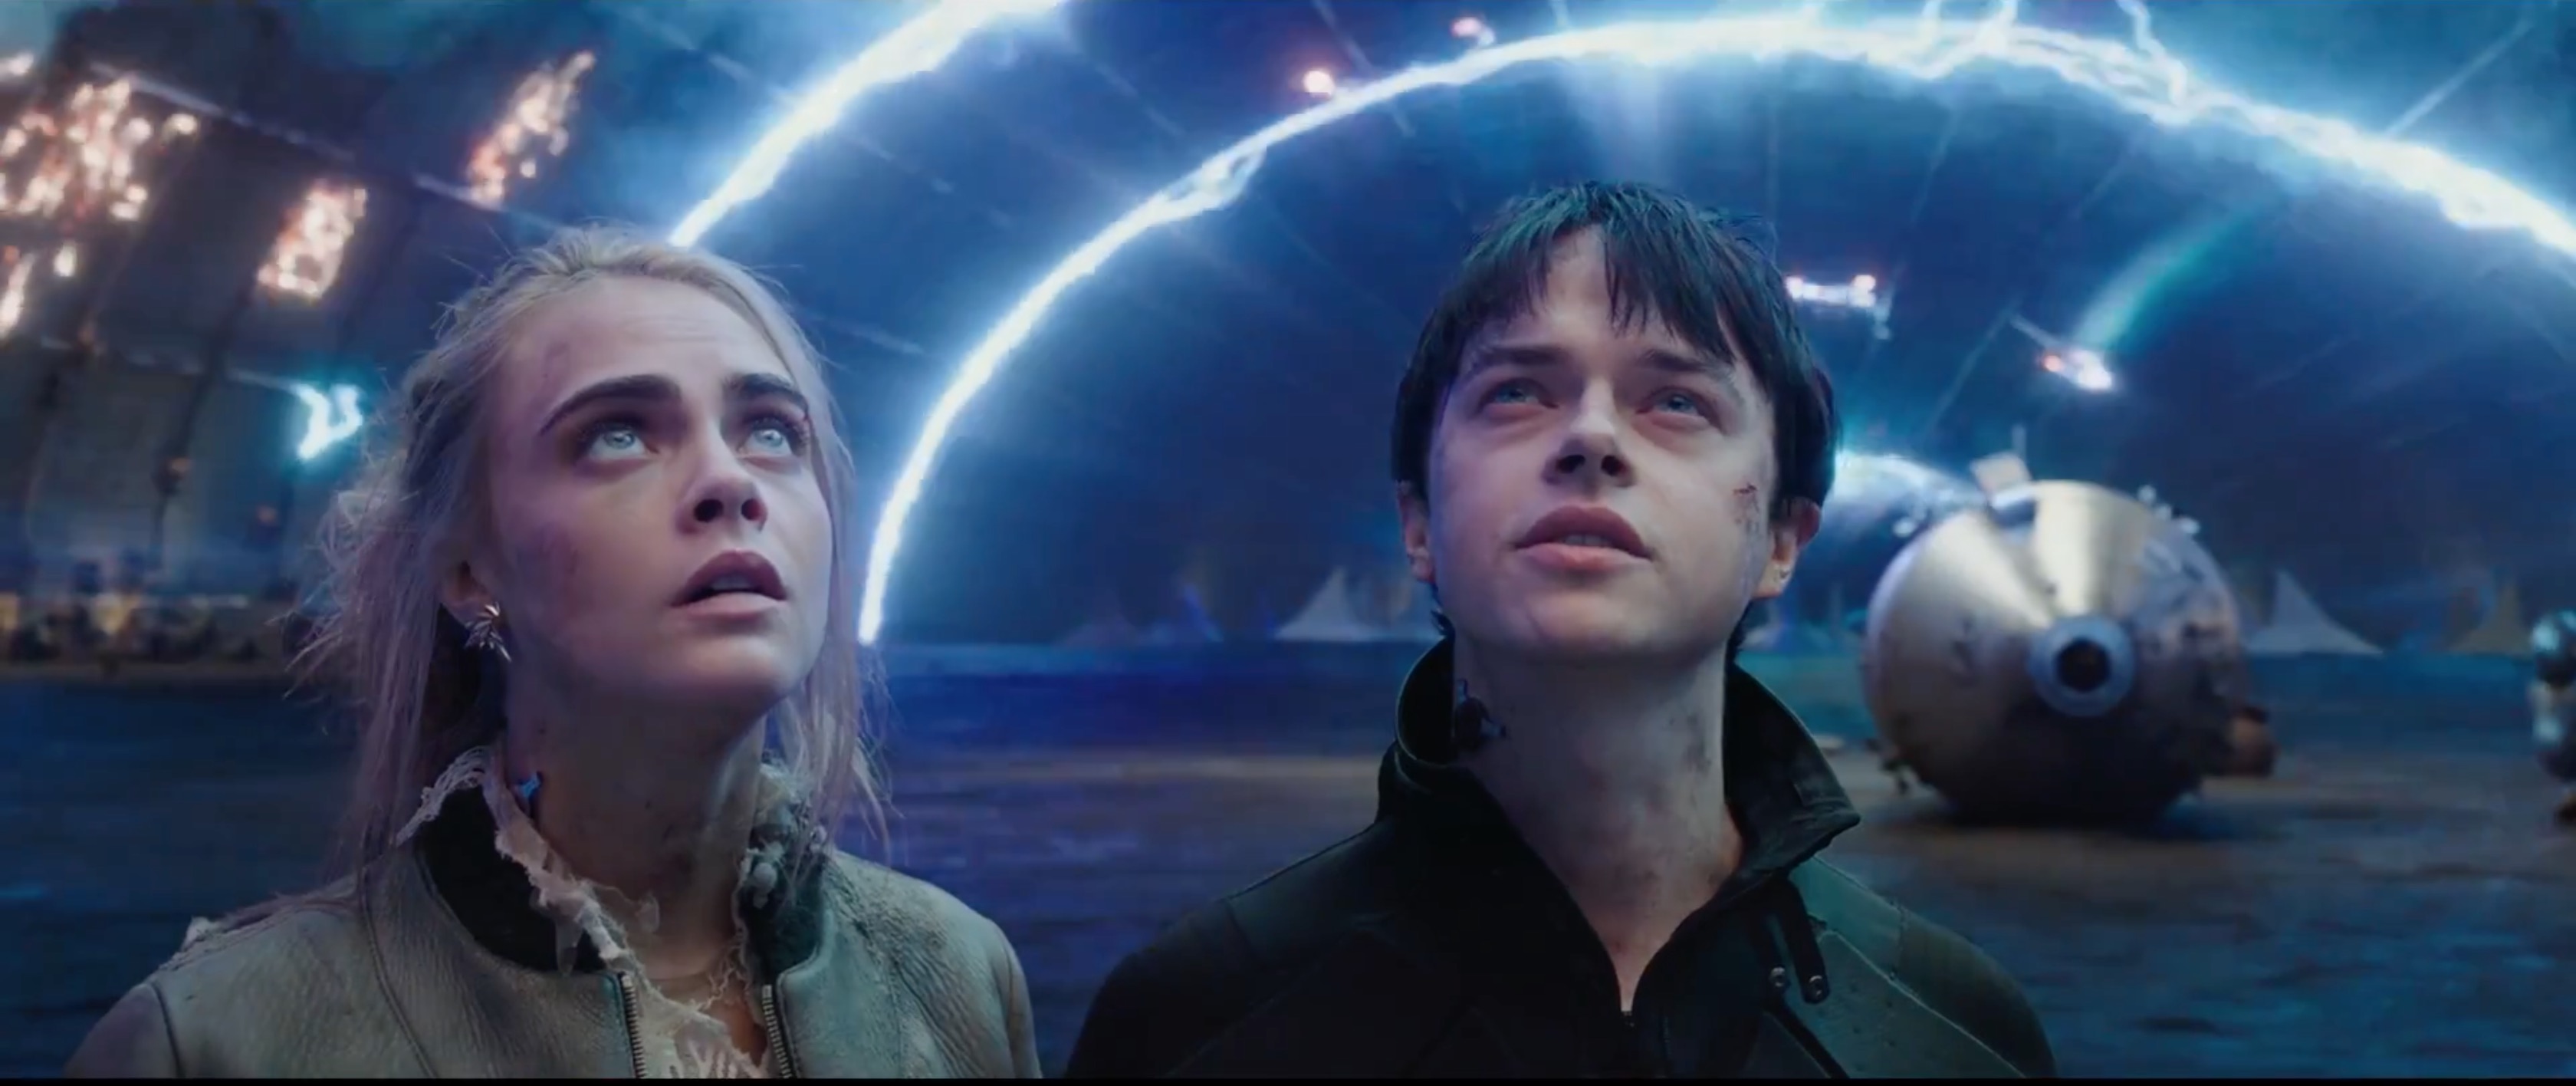 valerian-and-the-city-of-a-thousand-planets